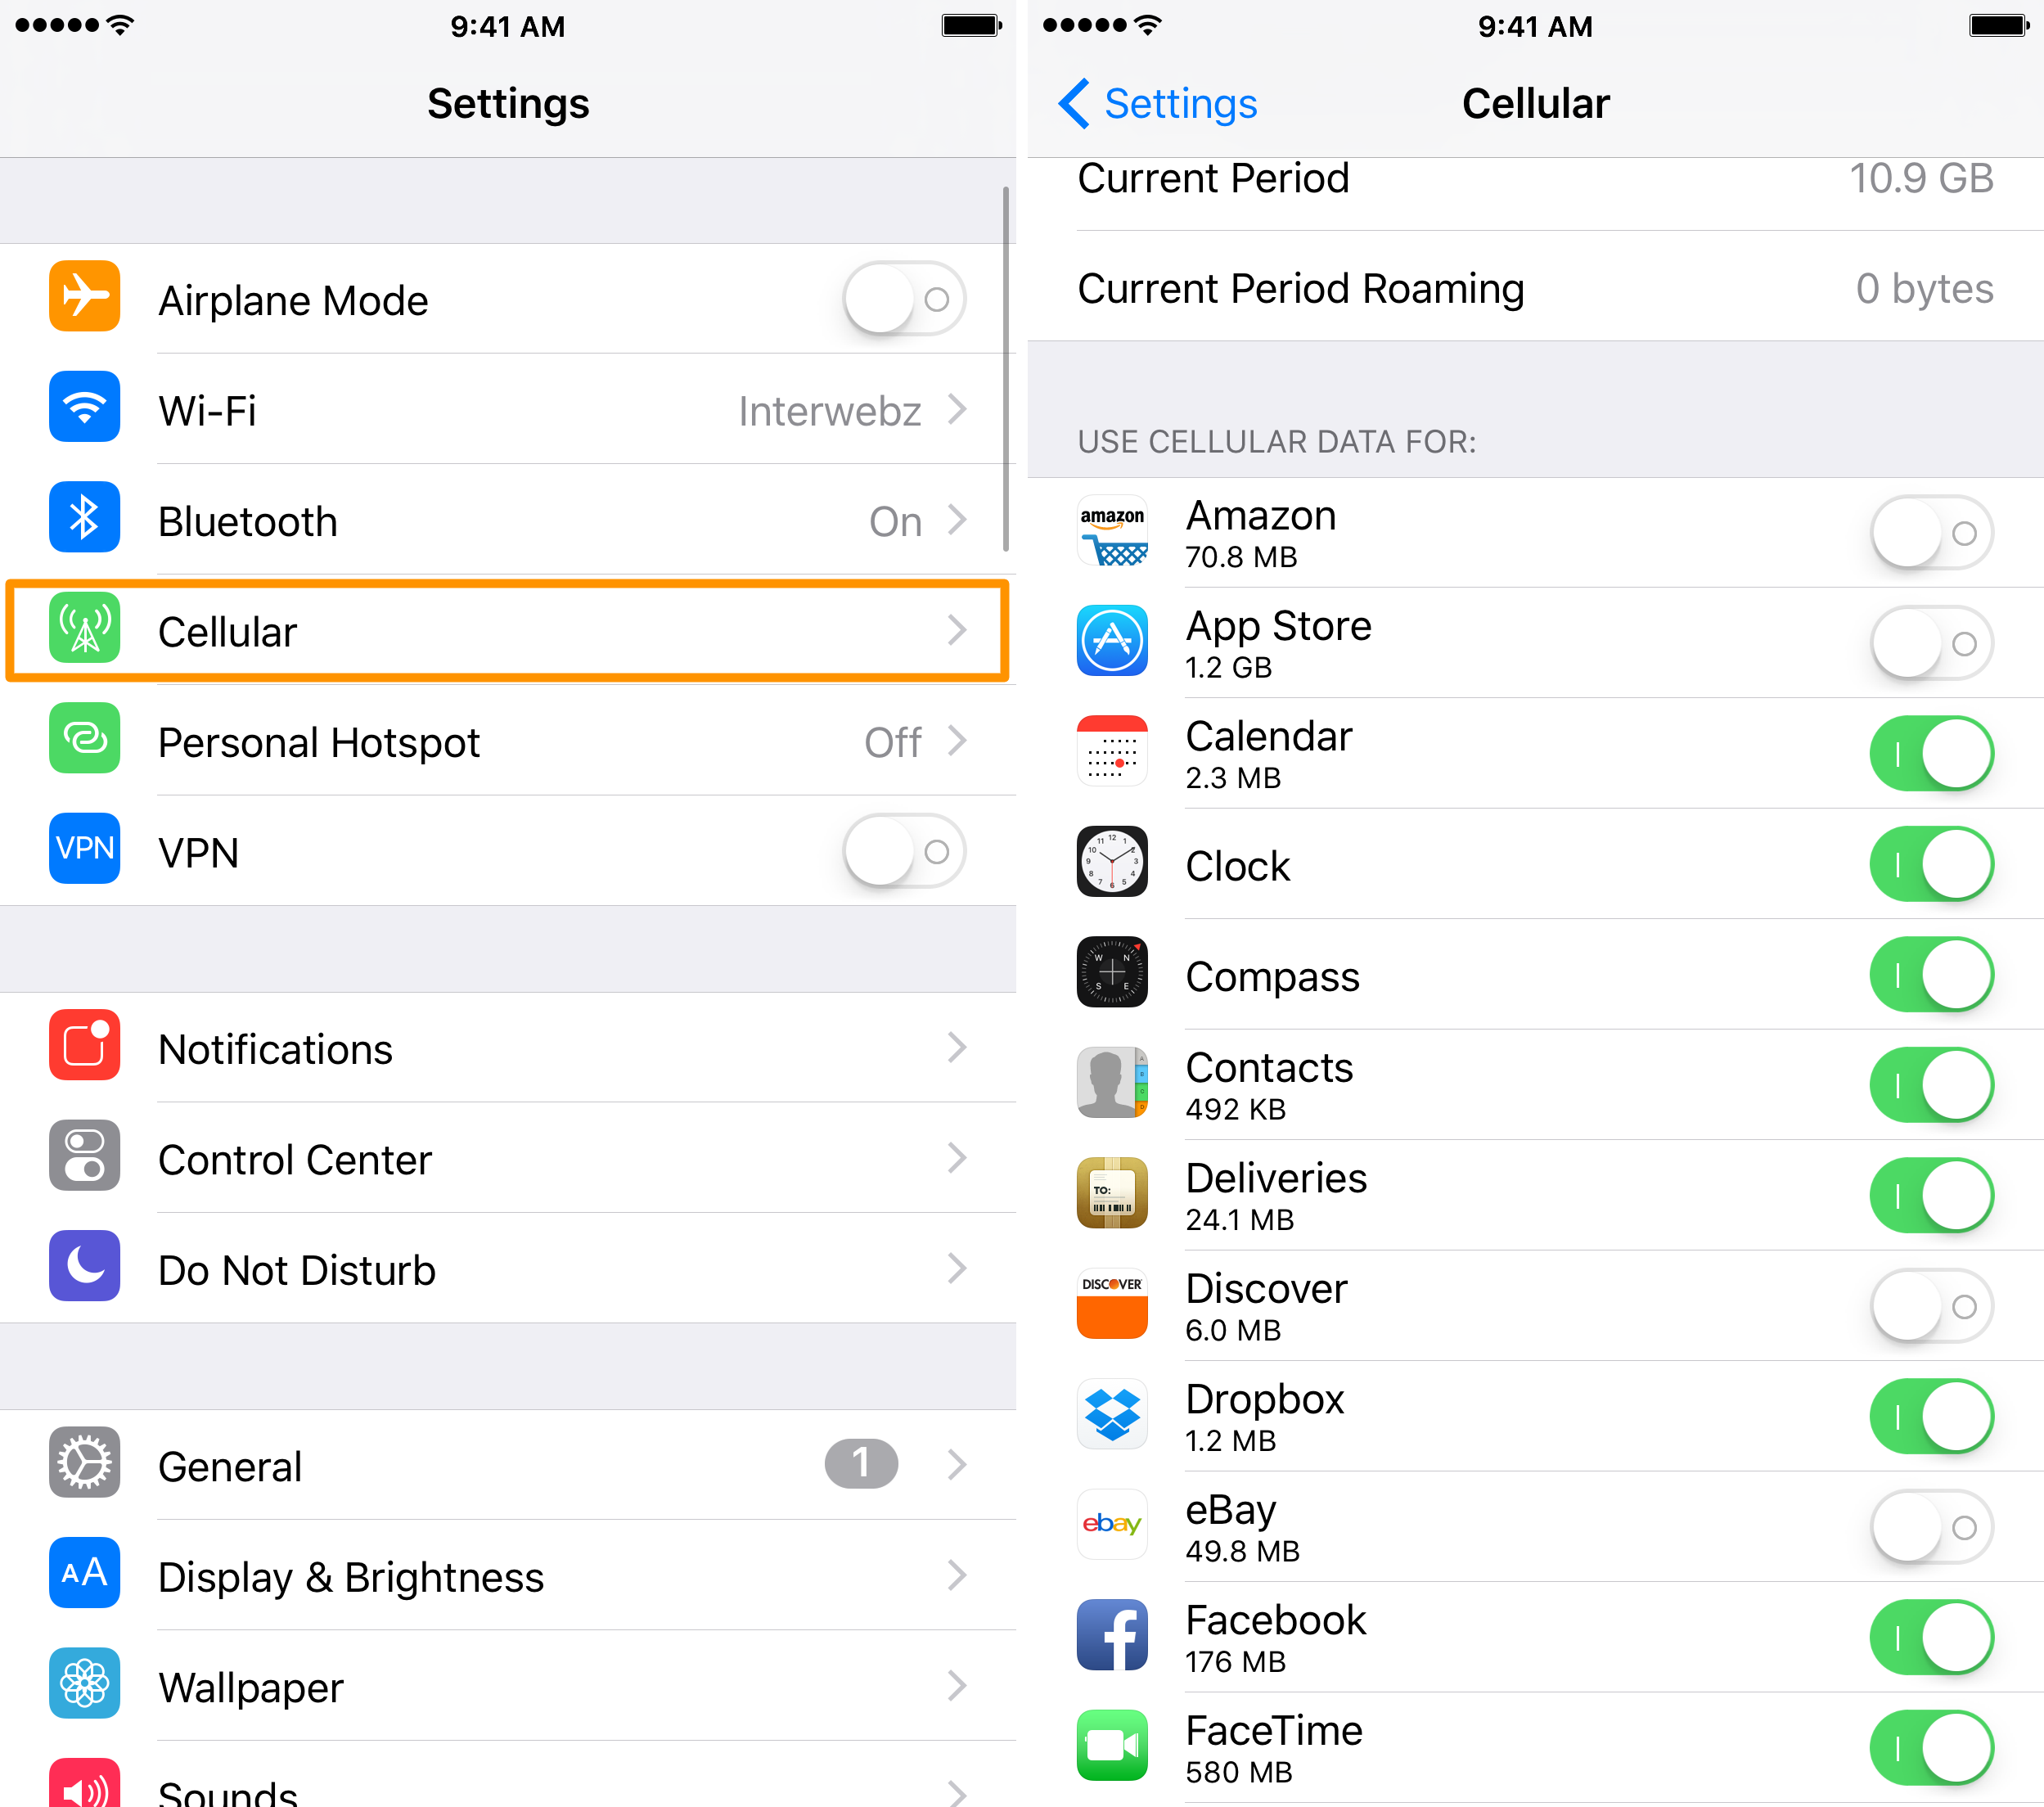 turn on or off cellular data for specific apps